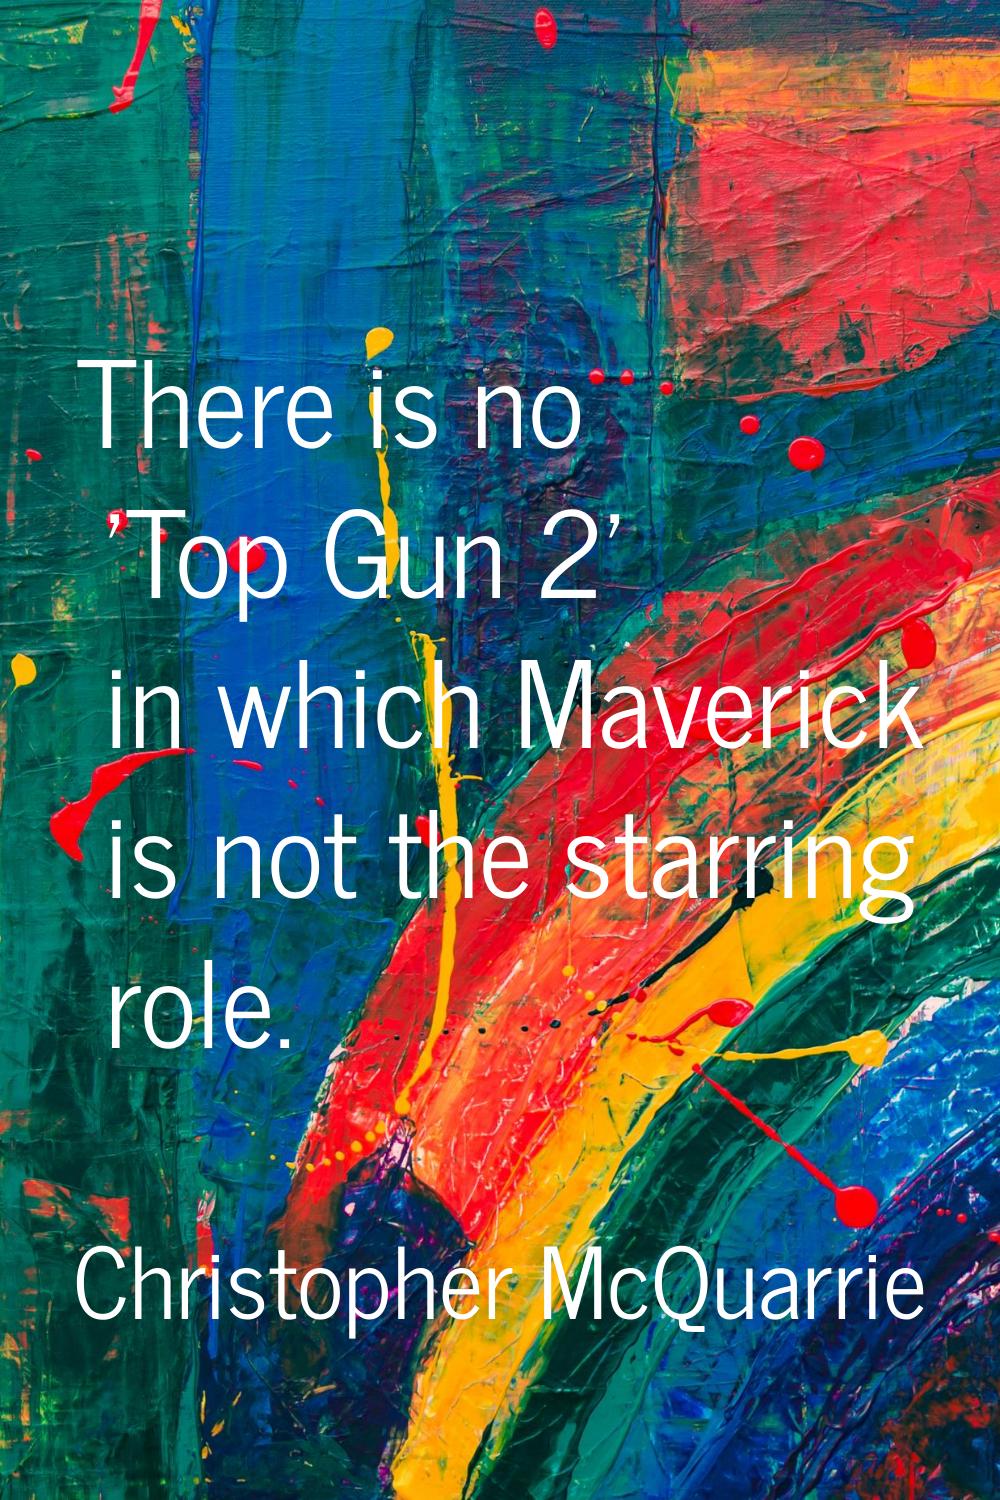 There is no 'Top Gun 2' in which Maverick is not the starring role.